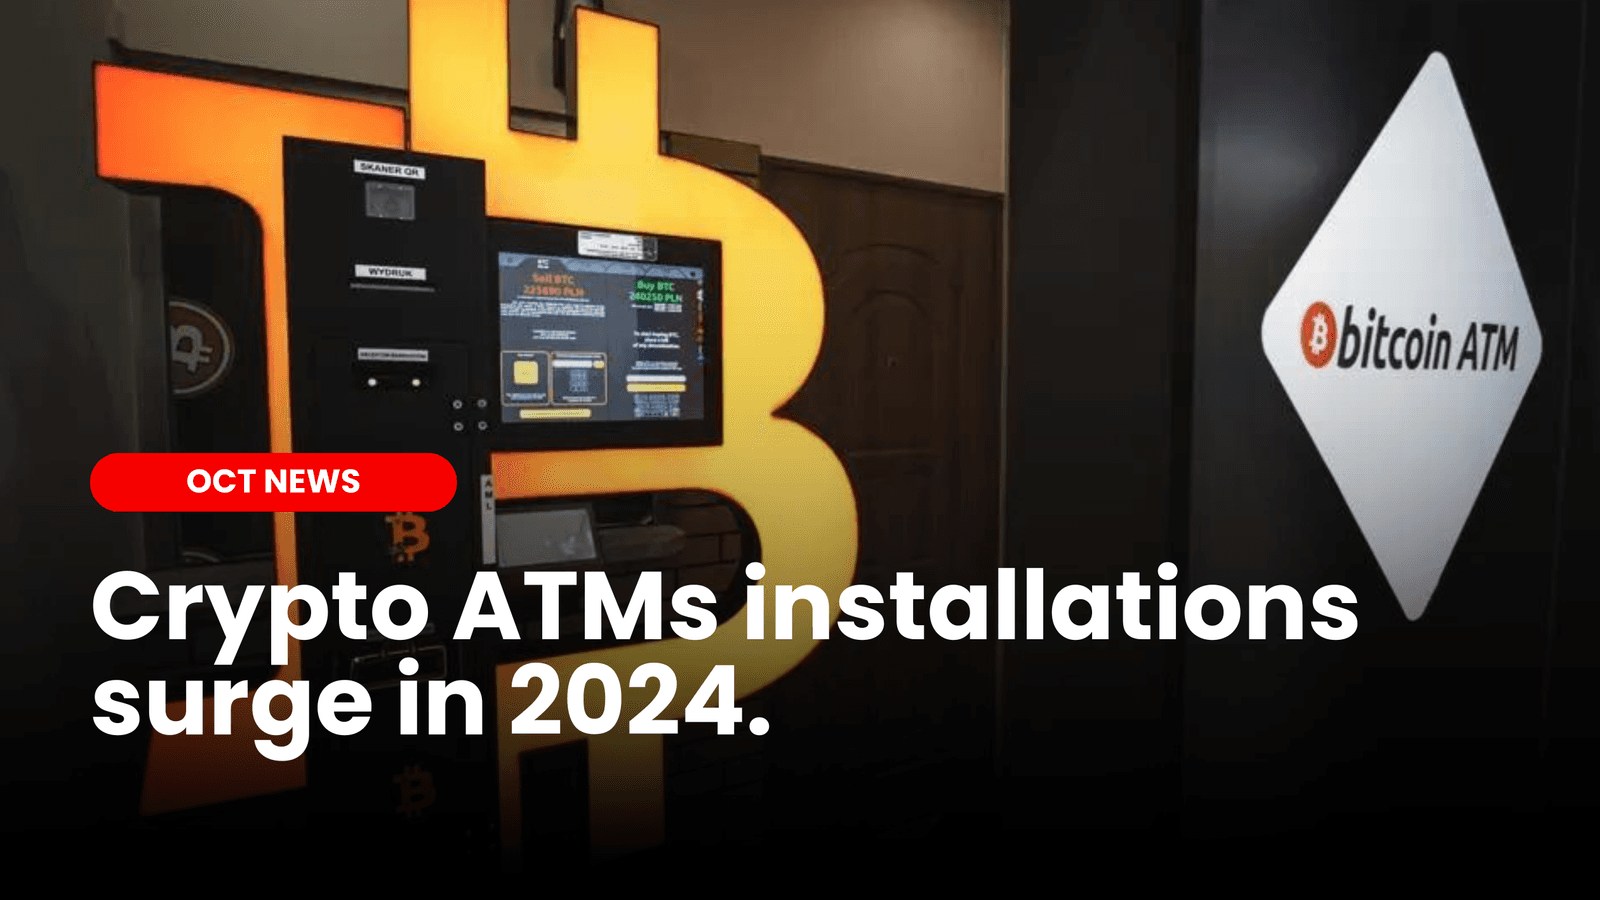 Steady Growth of Crypto ATMs in 2024 Despite June Dip